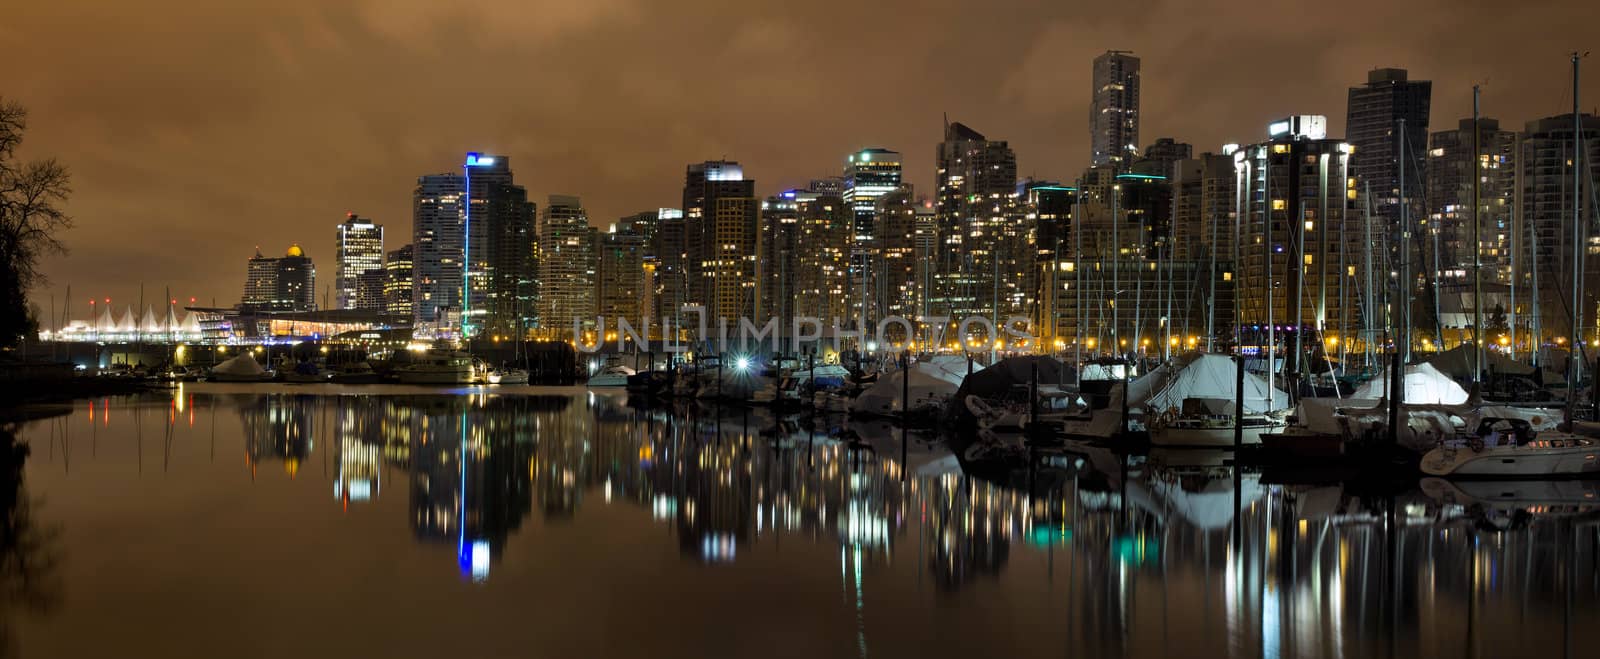 Vancouver BC Skyline from Stanley Park at Nigh by jpldesigns